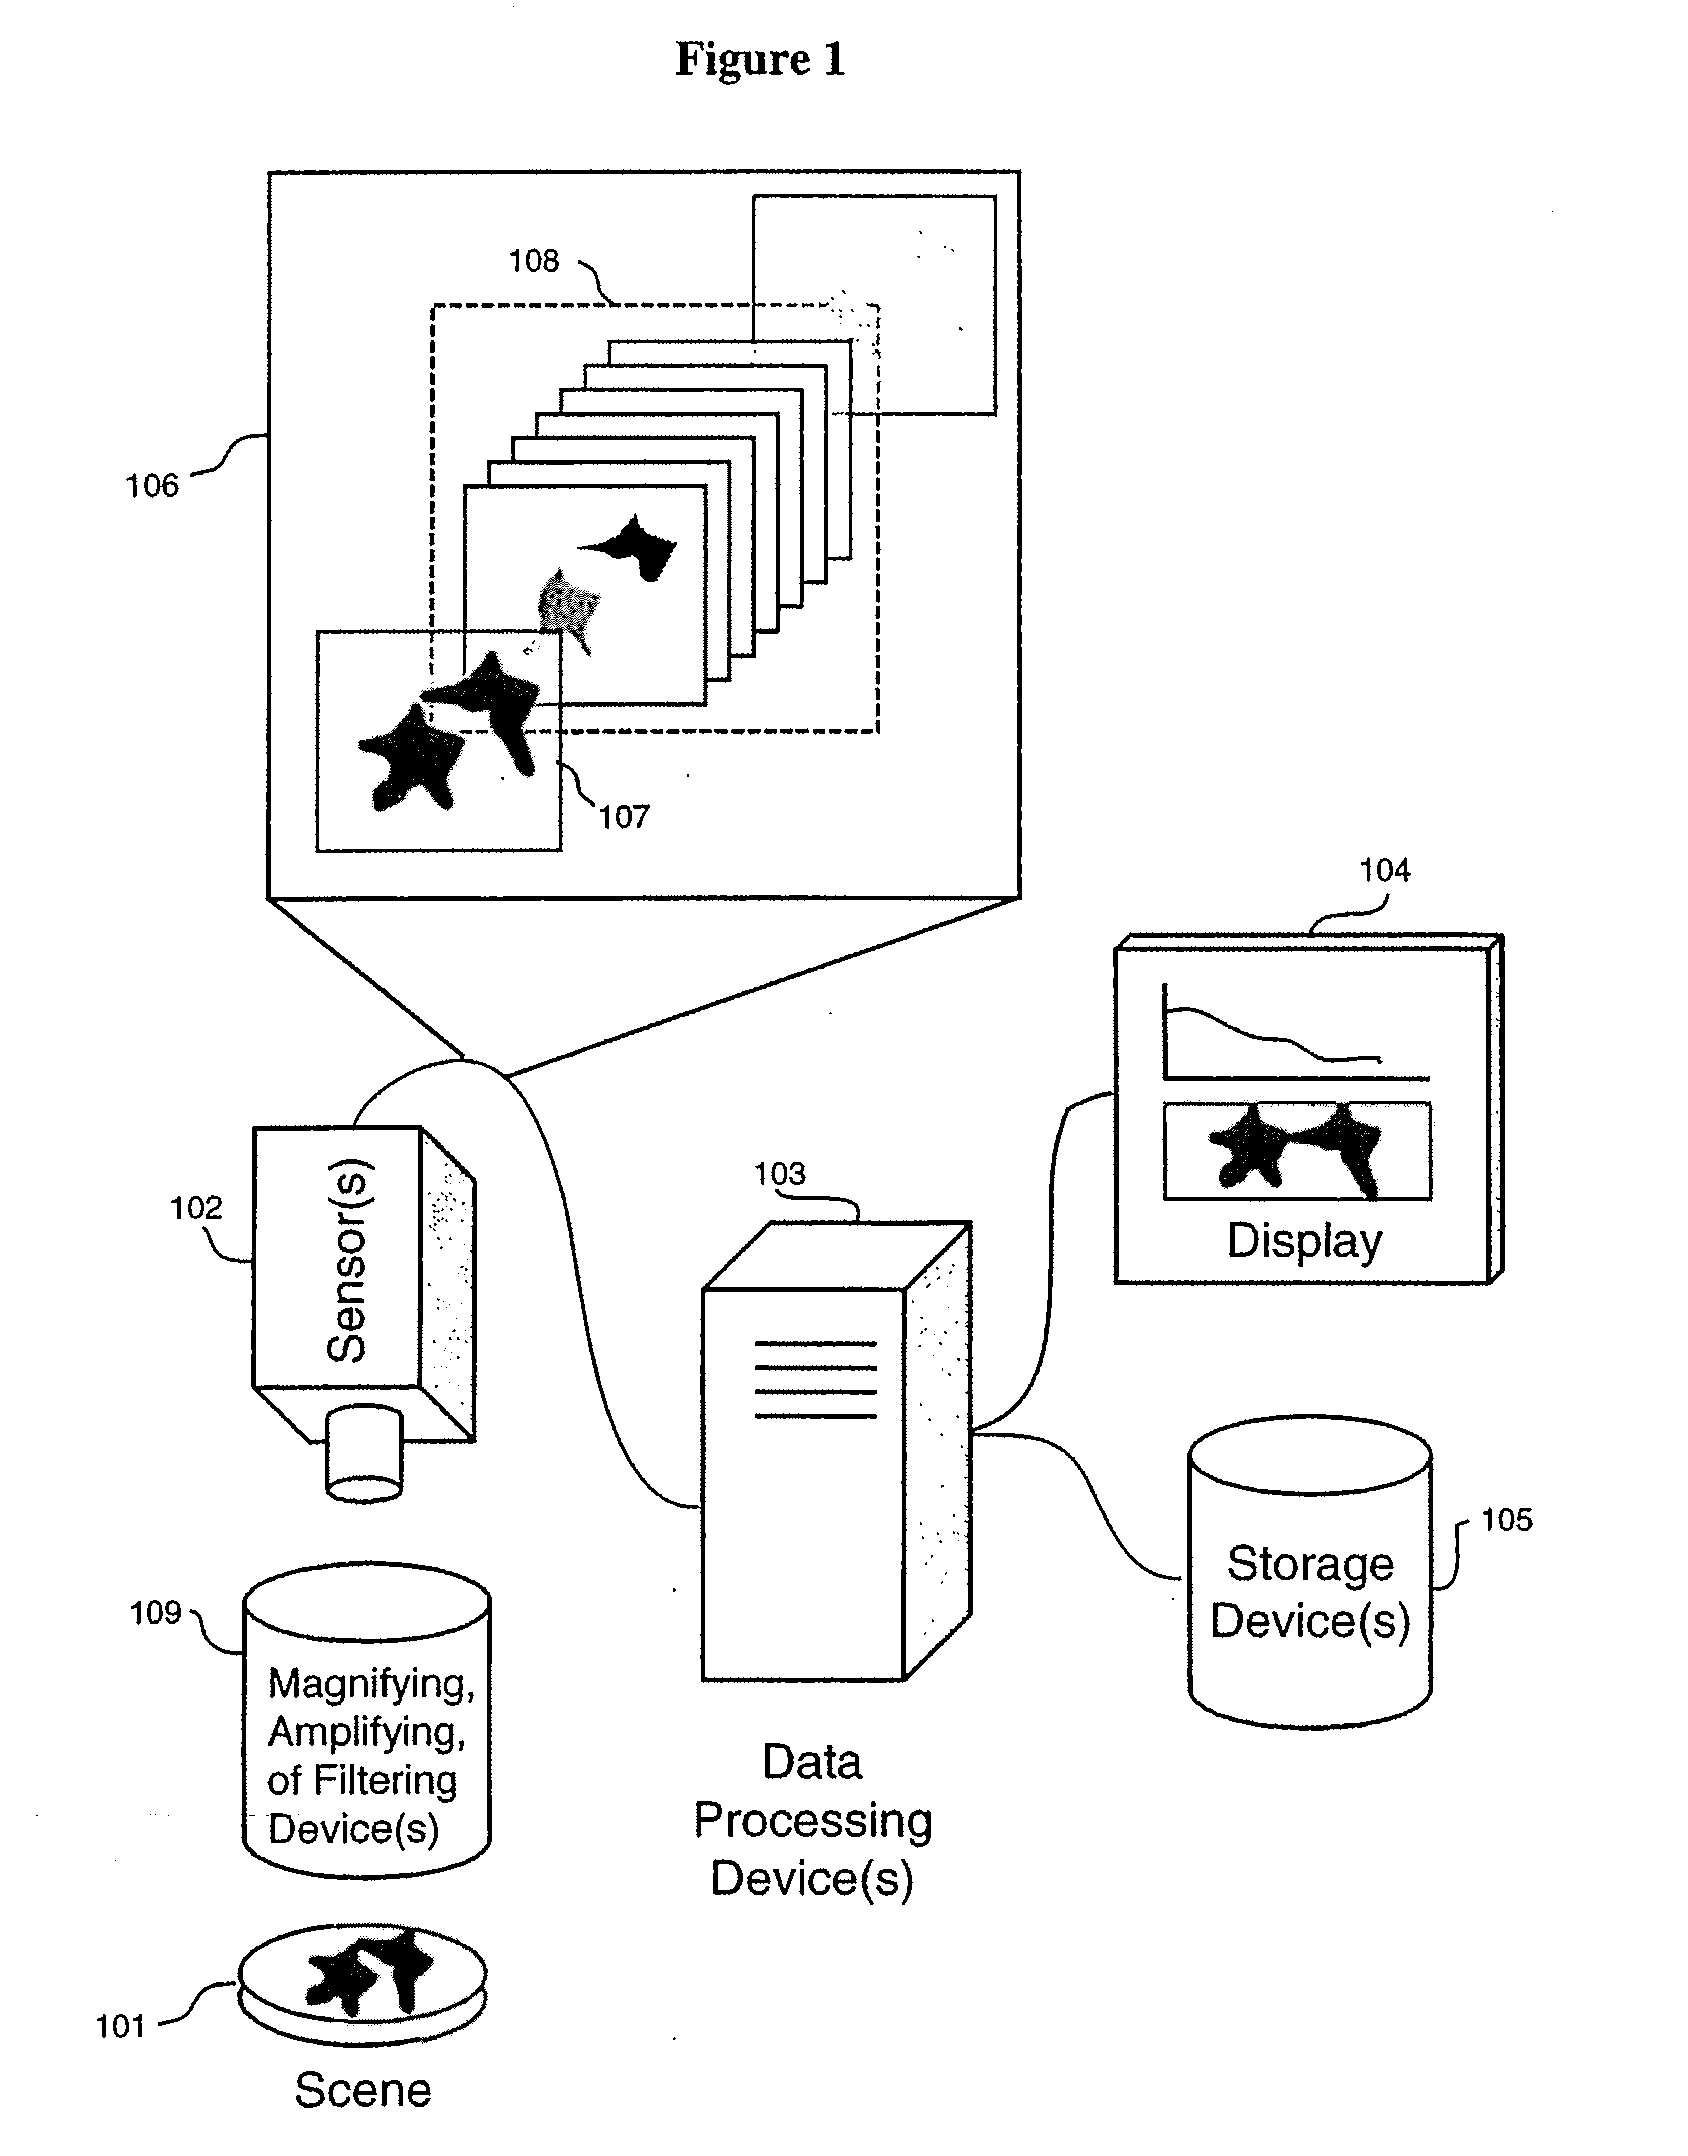 Method and Apparatus for Acquisition, Compression, and Characterization of Spatiotemporal Signals